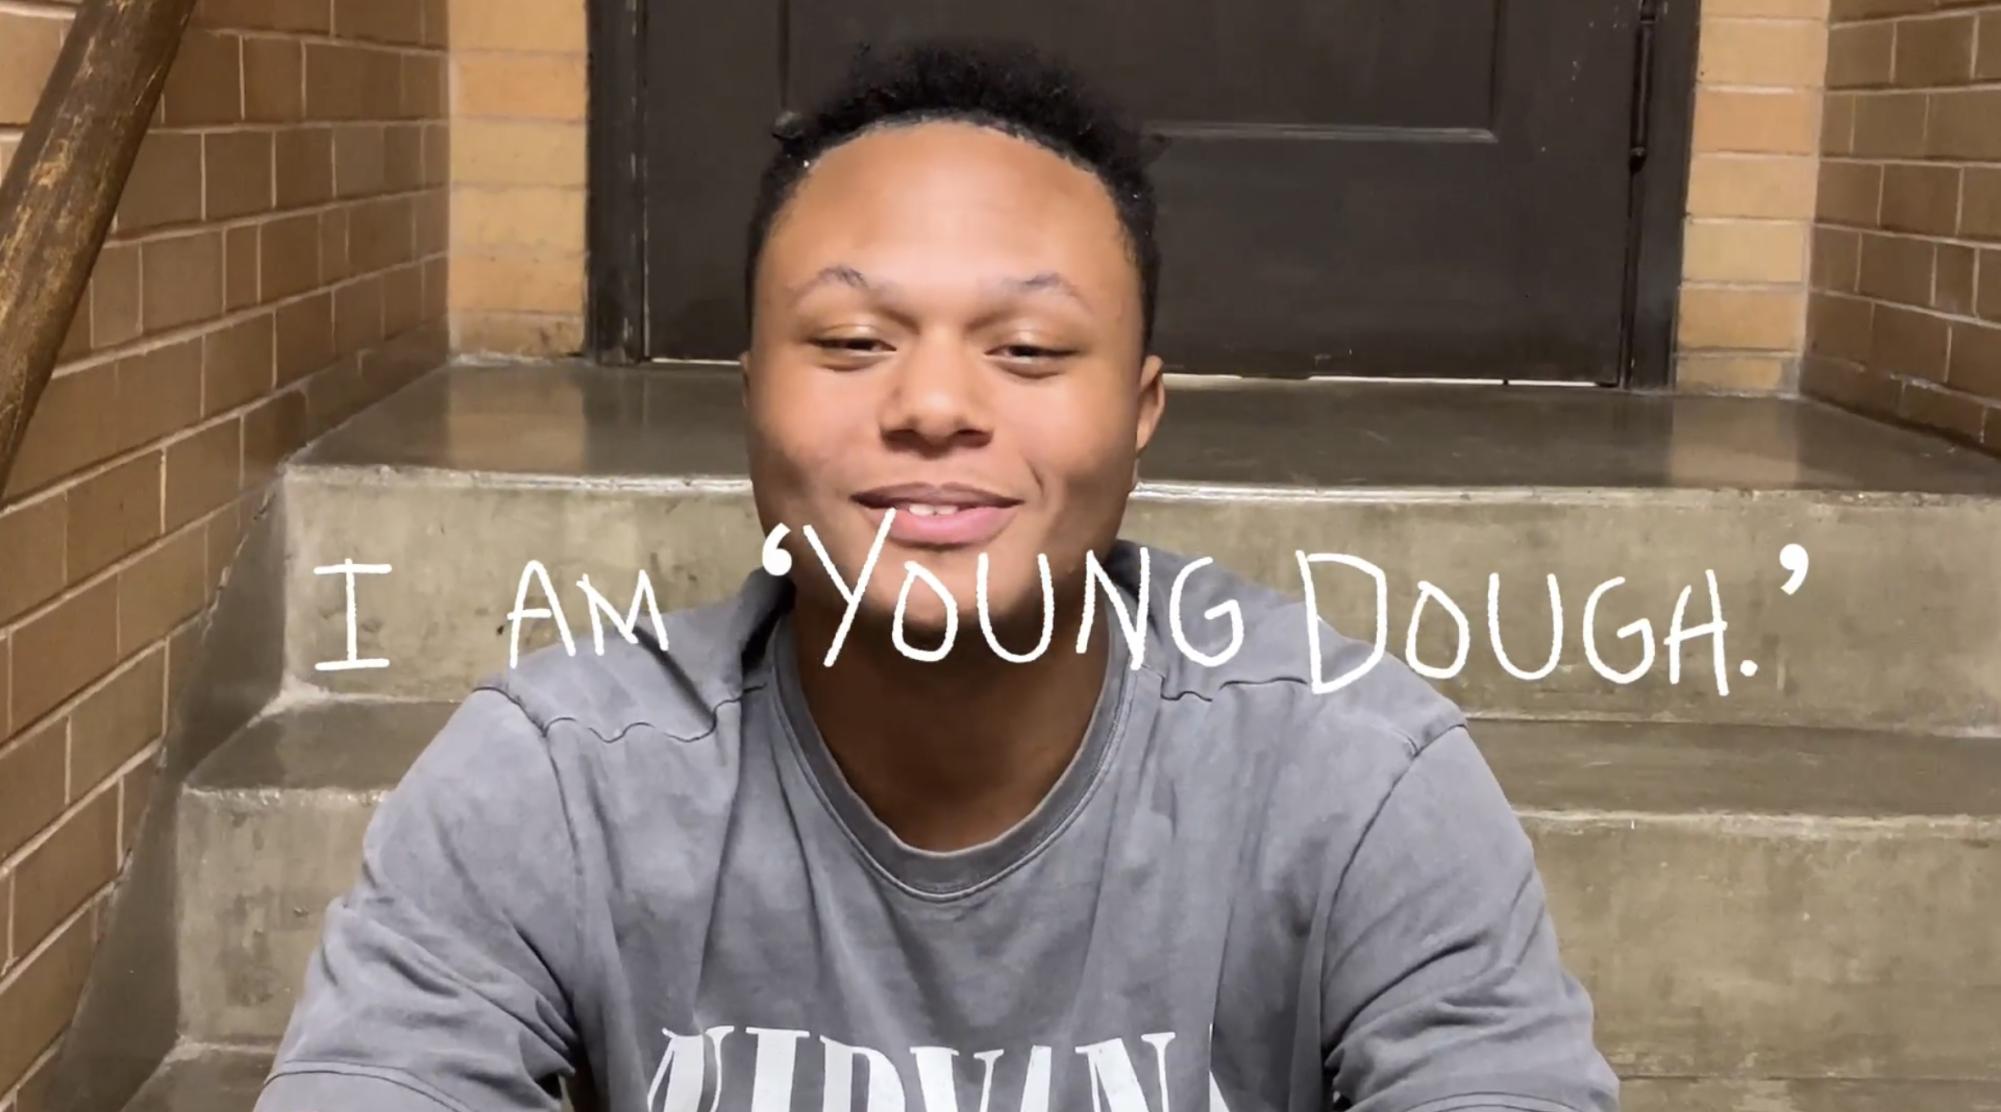 I am Yung Dough: City Highs Rapper, Brandon Davie, In His Own Words